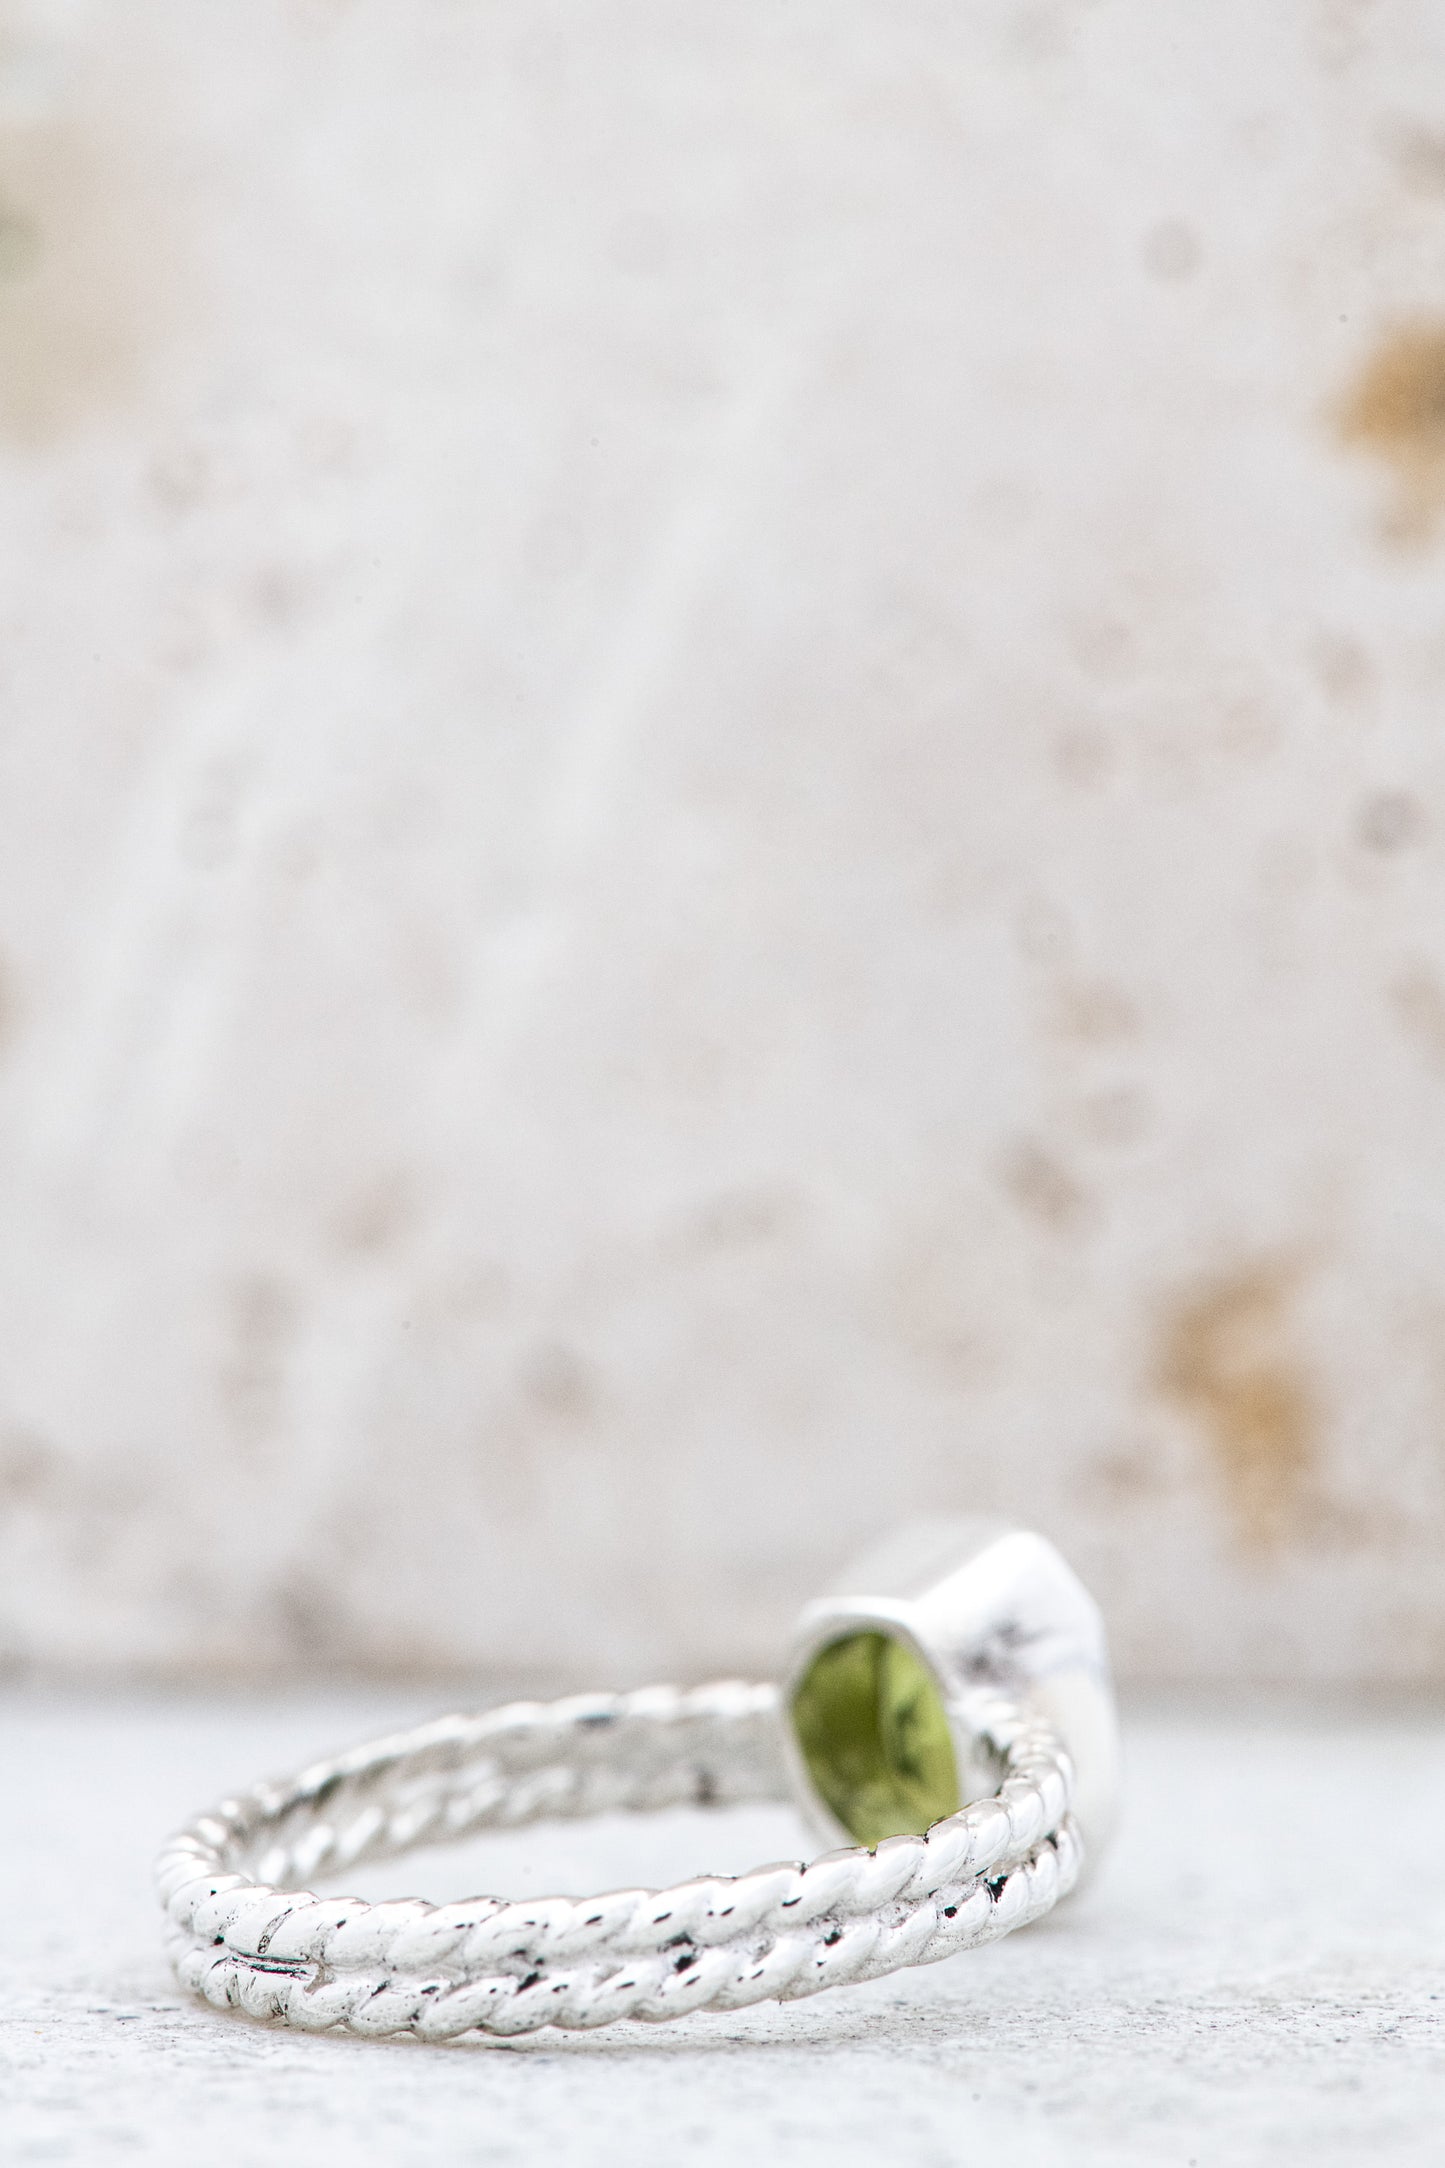 A handmade sterling silver One of Kind Peridot Ring Size 7.5 by Cassin Jewelry.